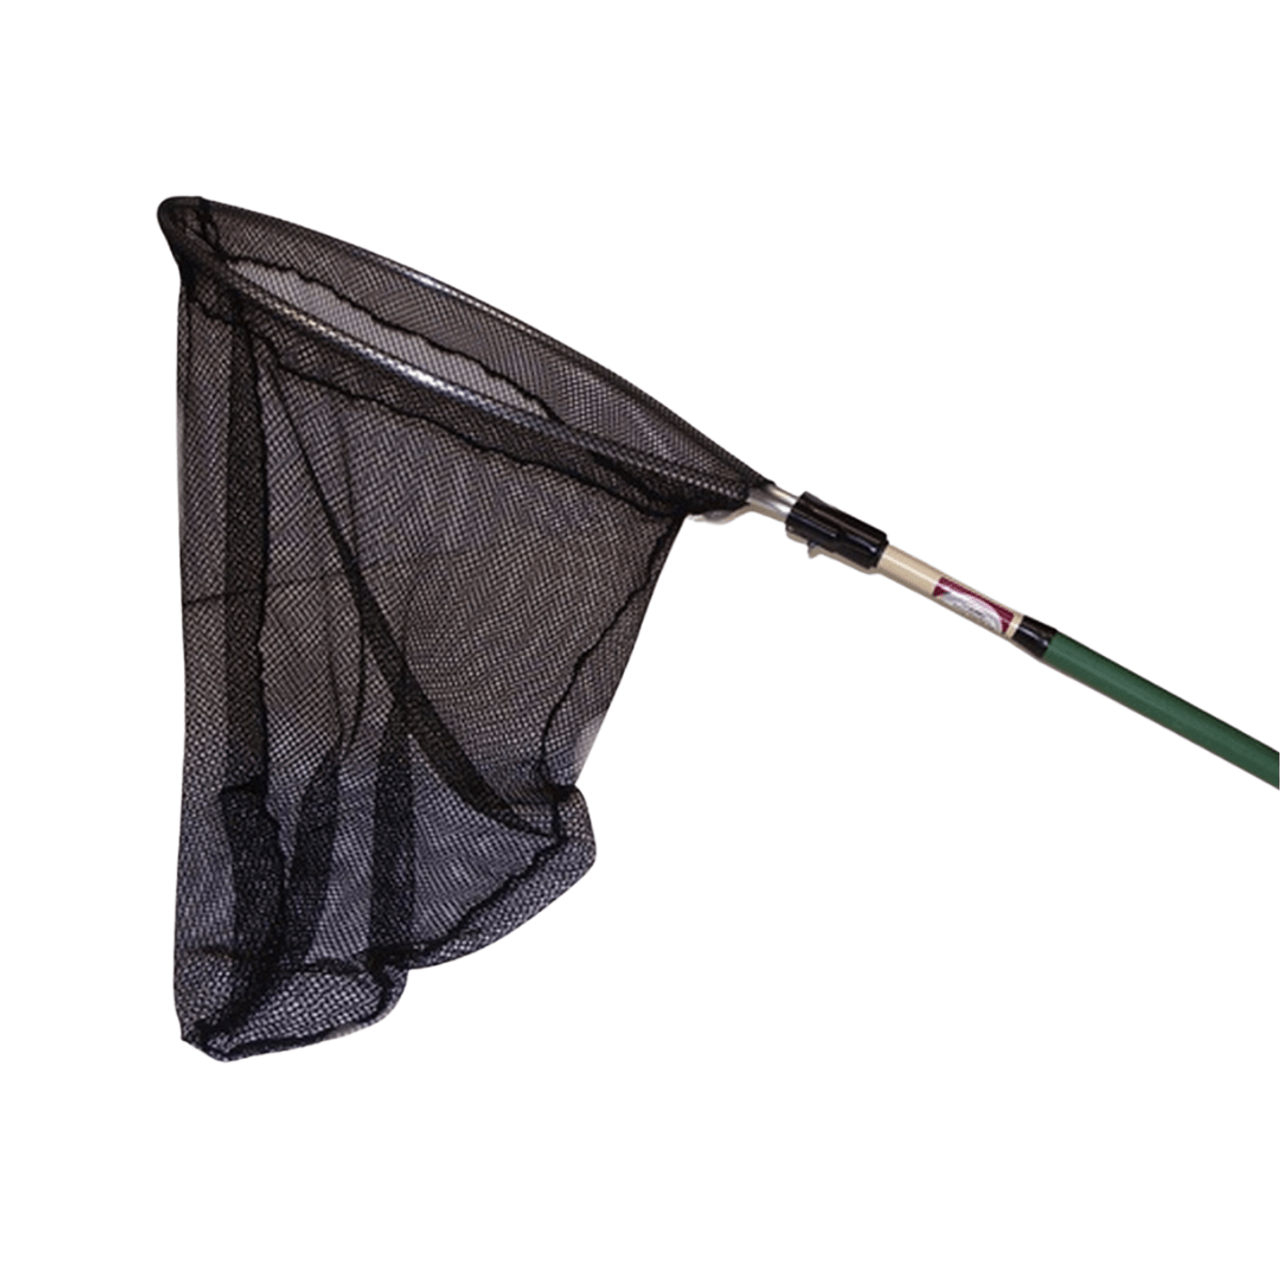 This Heavy Duty Catching Net with 48 handle and 44 net comes